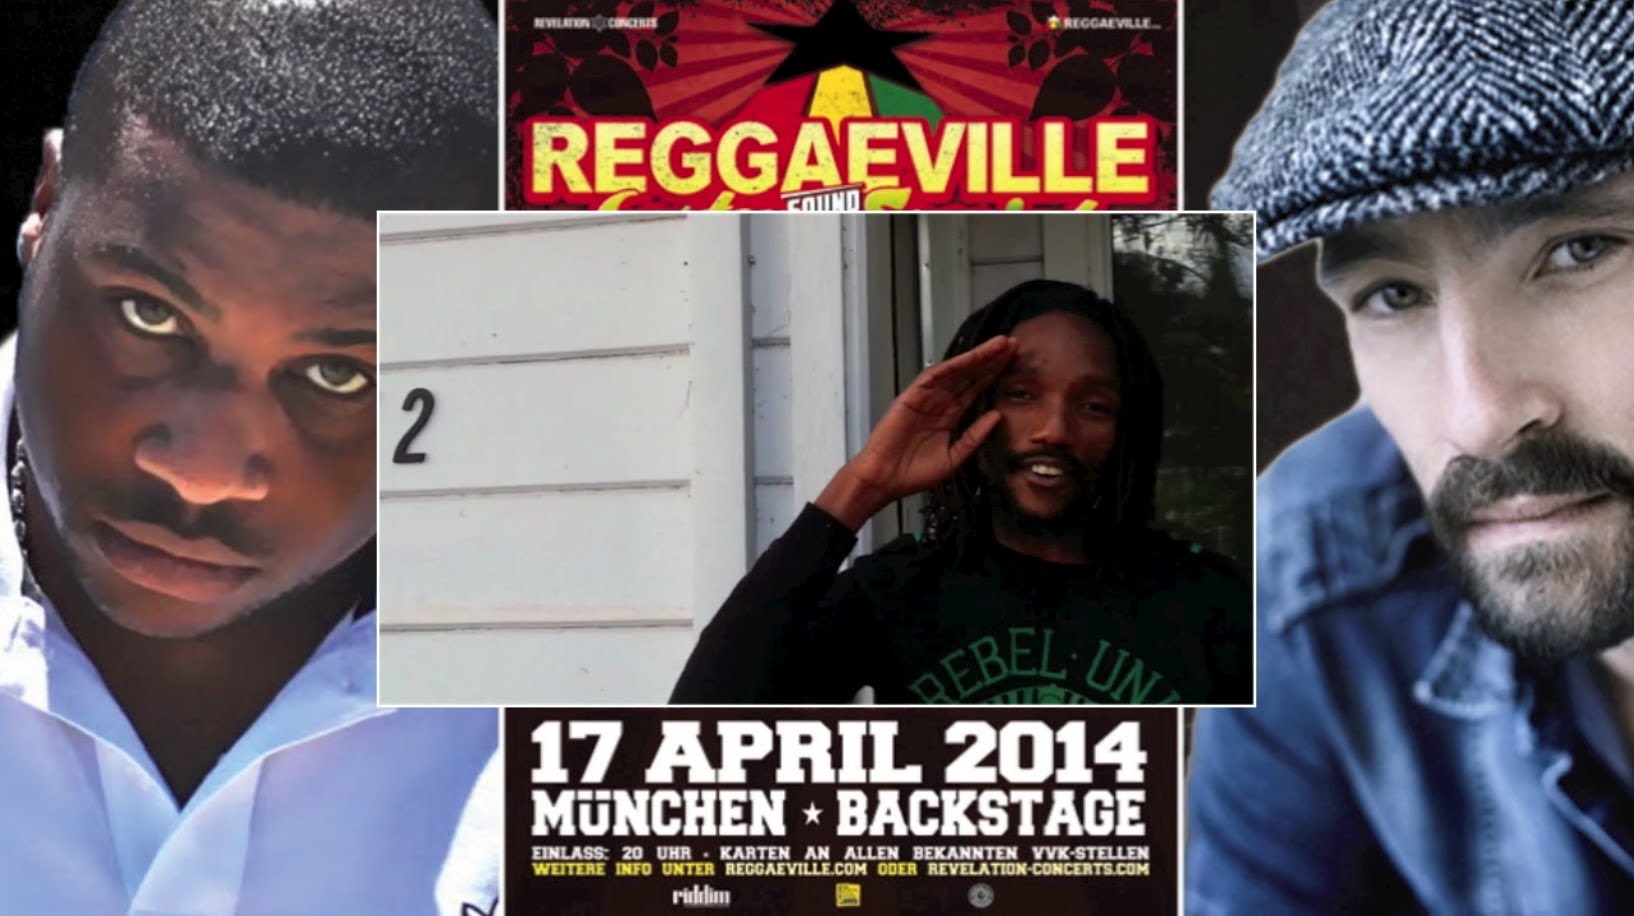 Kabaka Pyramid @ Reggaeville Easter Sound Special in Munich, Germany 2014 [4/14/2014]